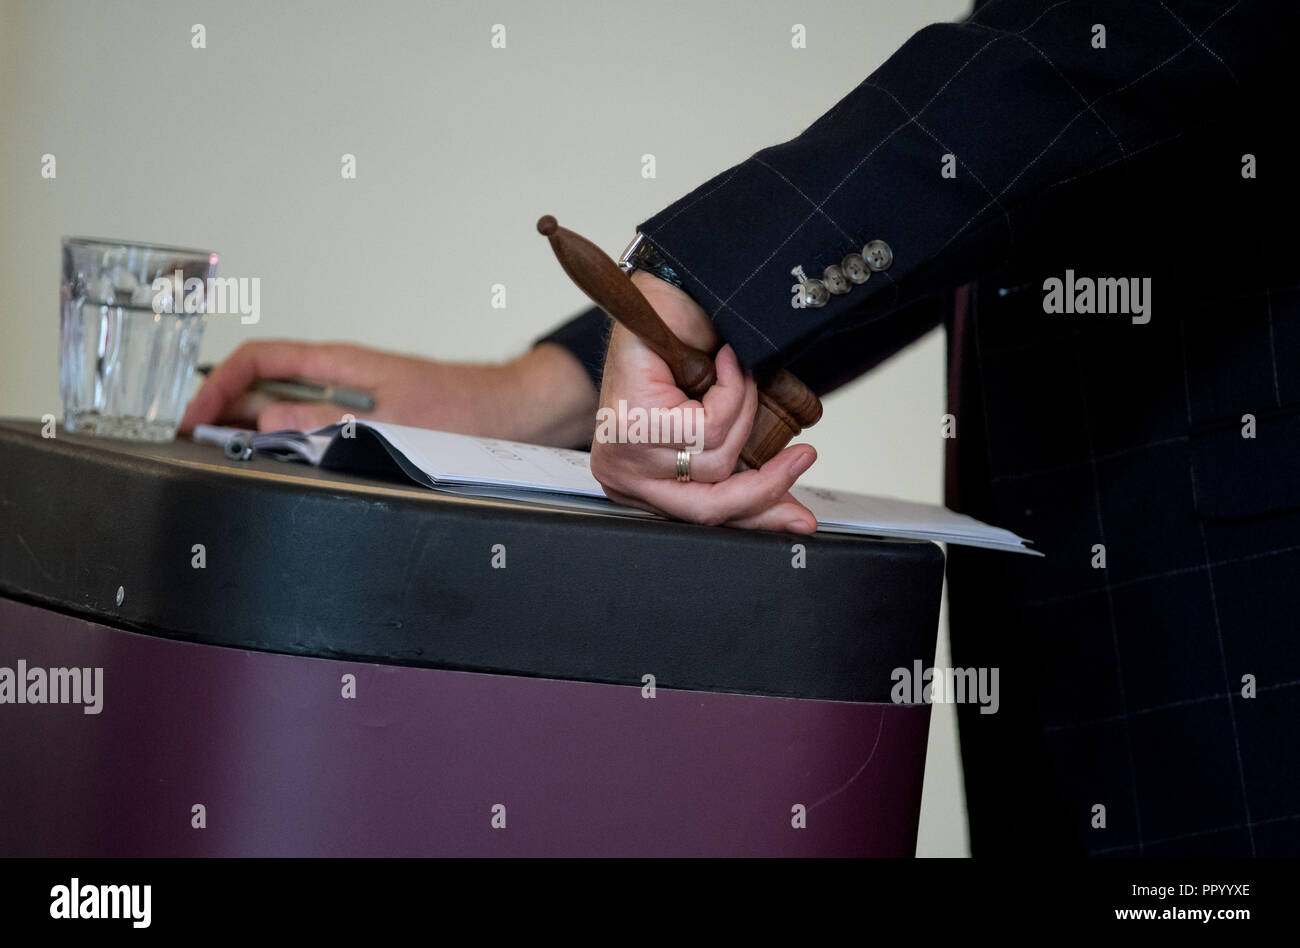 Gavel which is a small ceremonial mallet commonly made of hardwood, typically fashioned with a handle. Here it is being used at a housing auction. Stock Photo